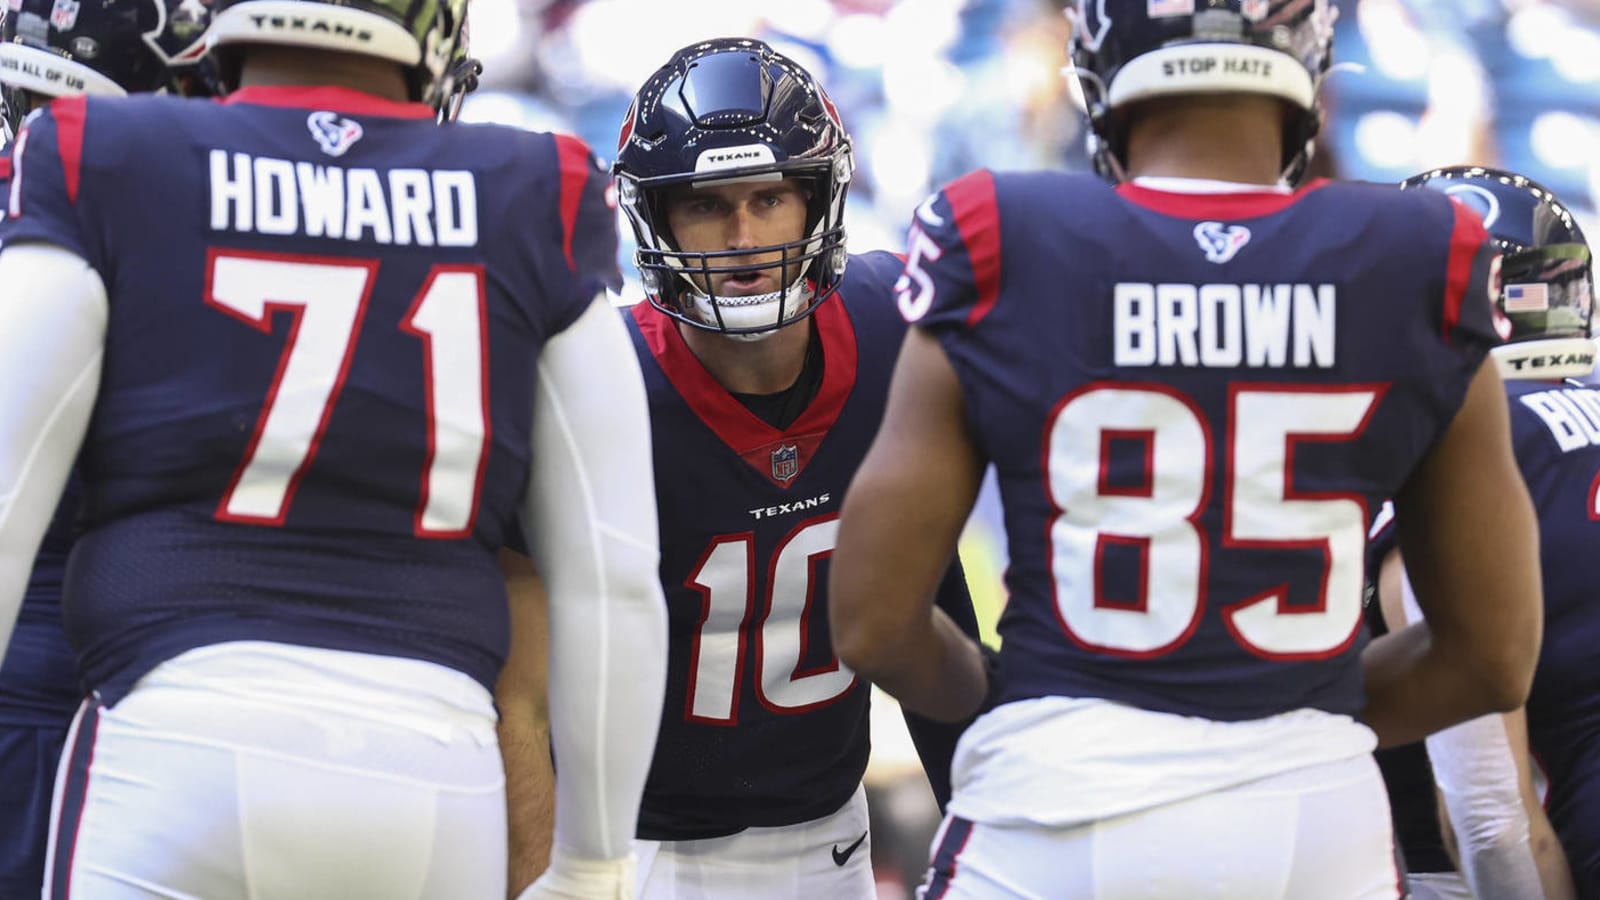 Watch: Texans rookie QB Mills shines on opening drive with TD